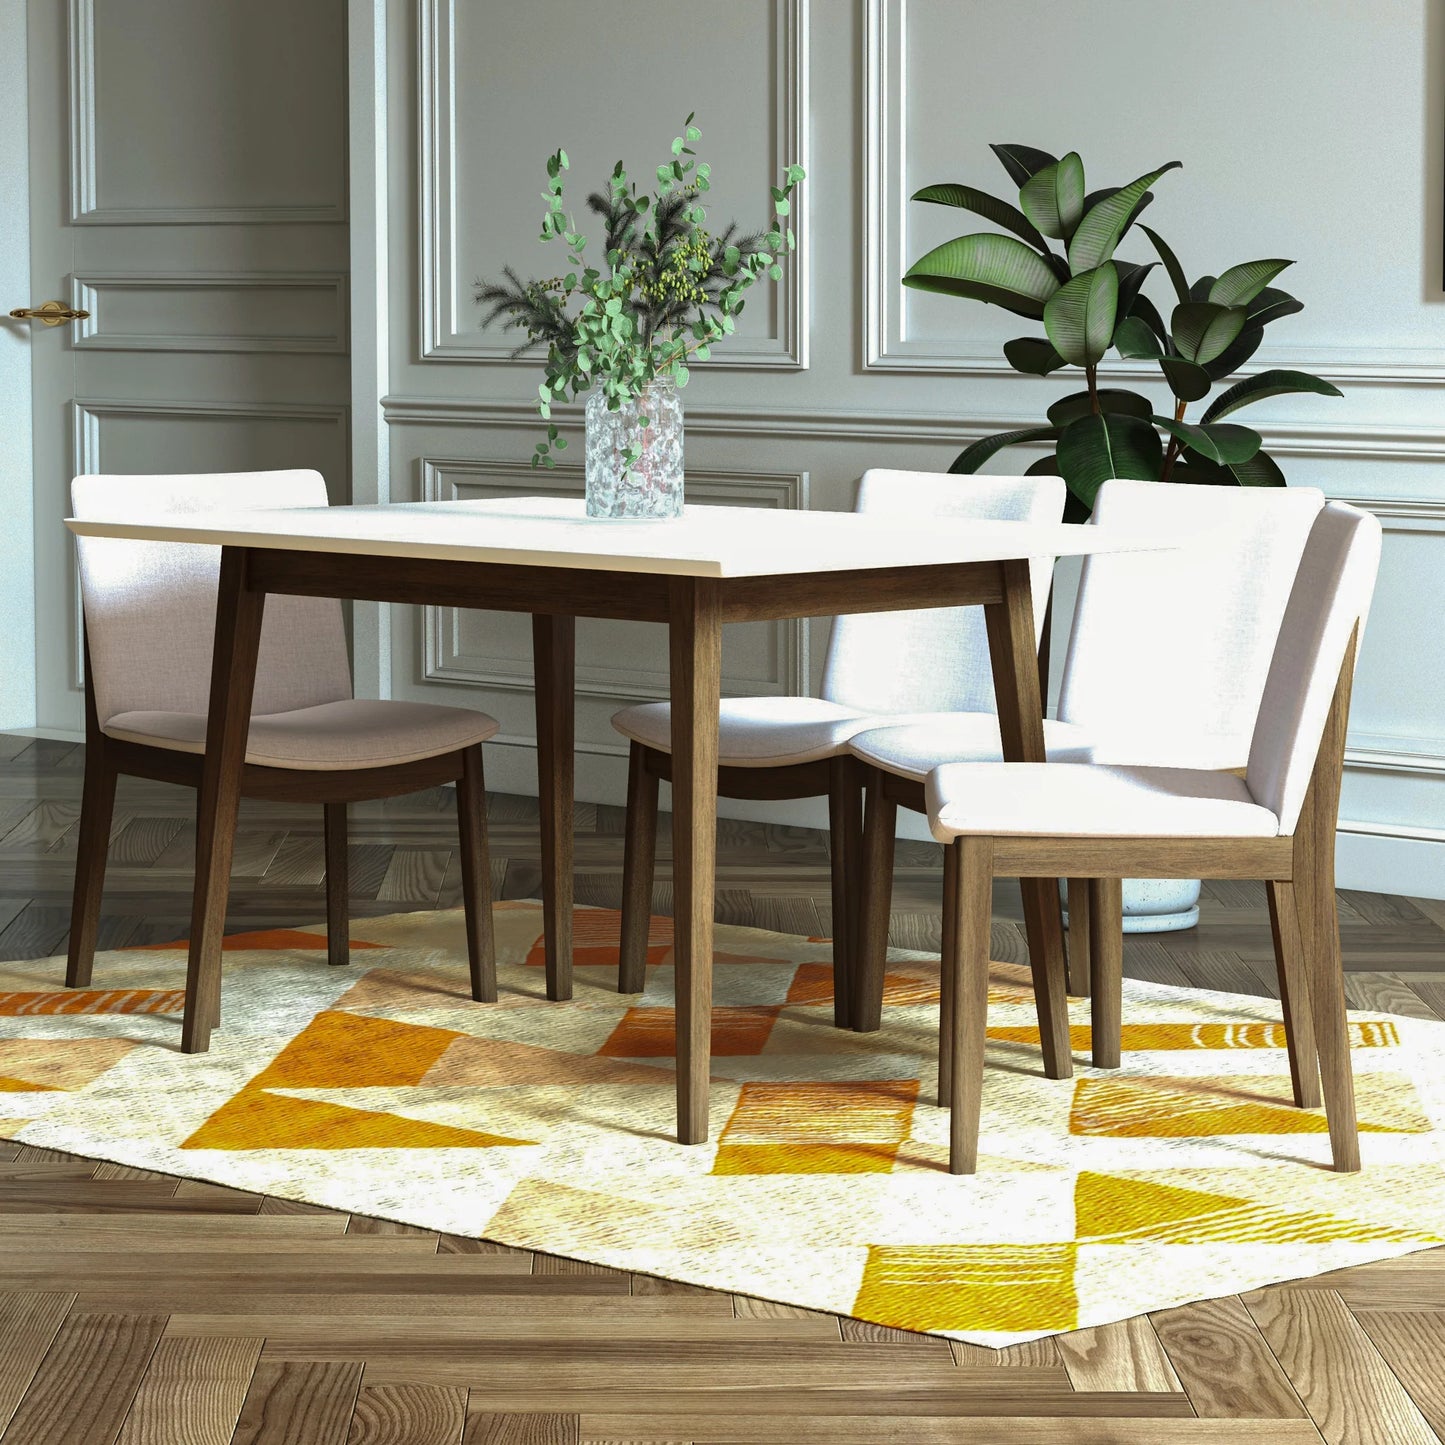 Adira (Small - White) Dining Set with 4 Virginia (Beige) Dining Chairs